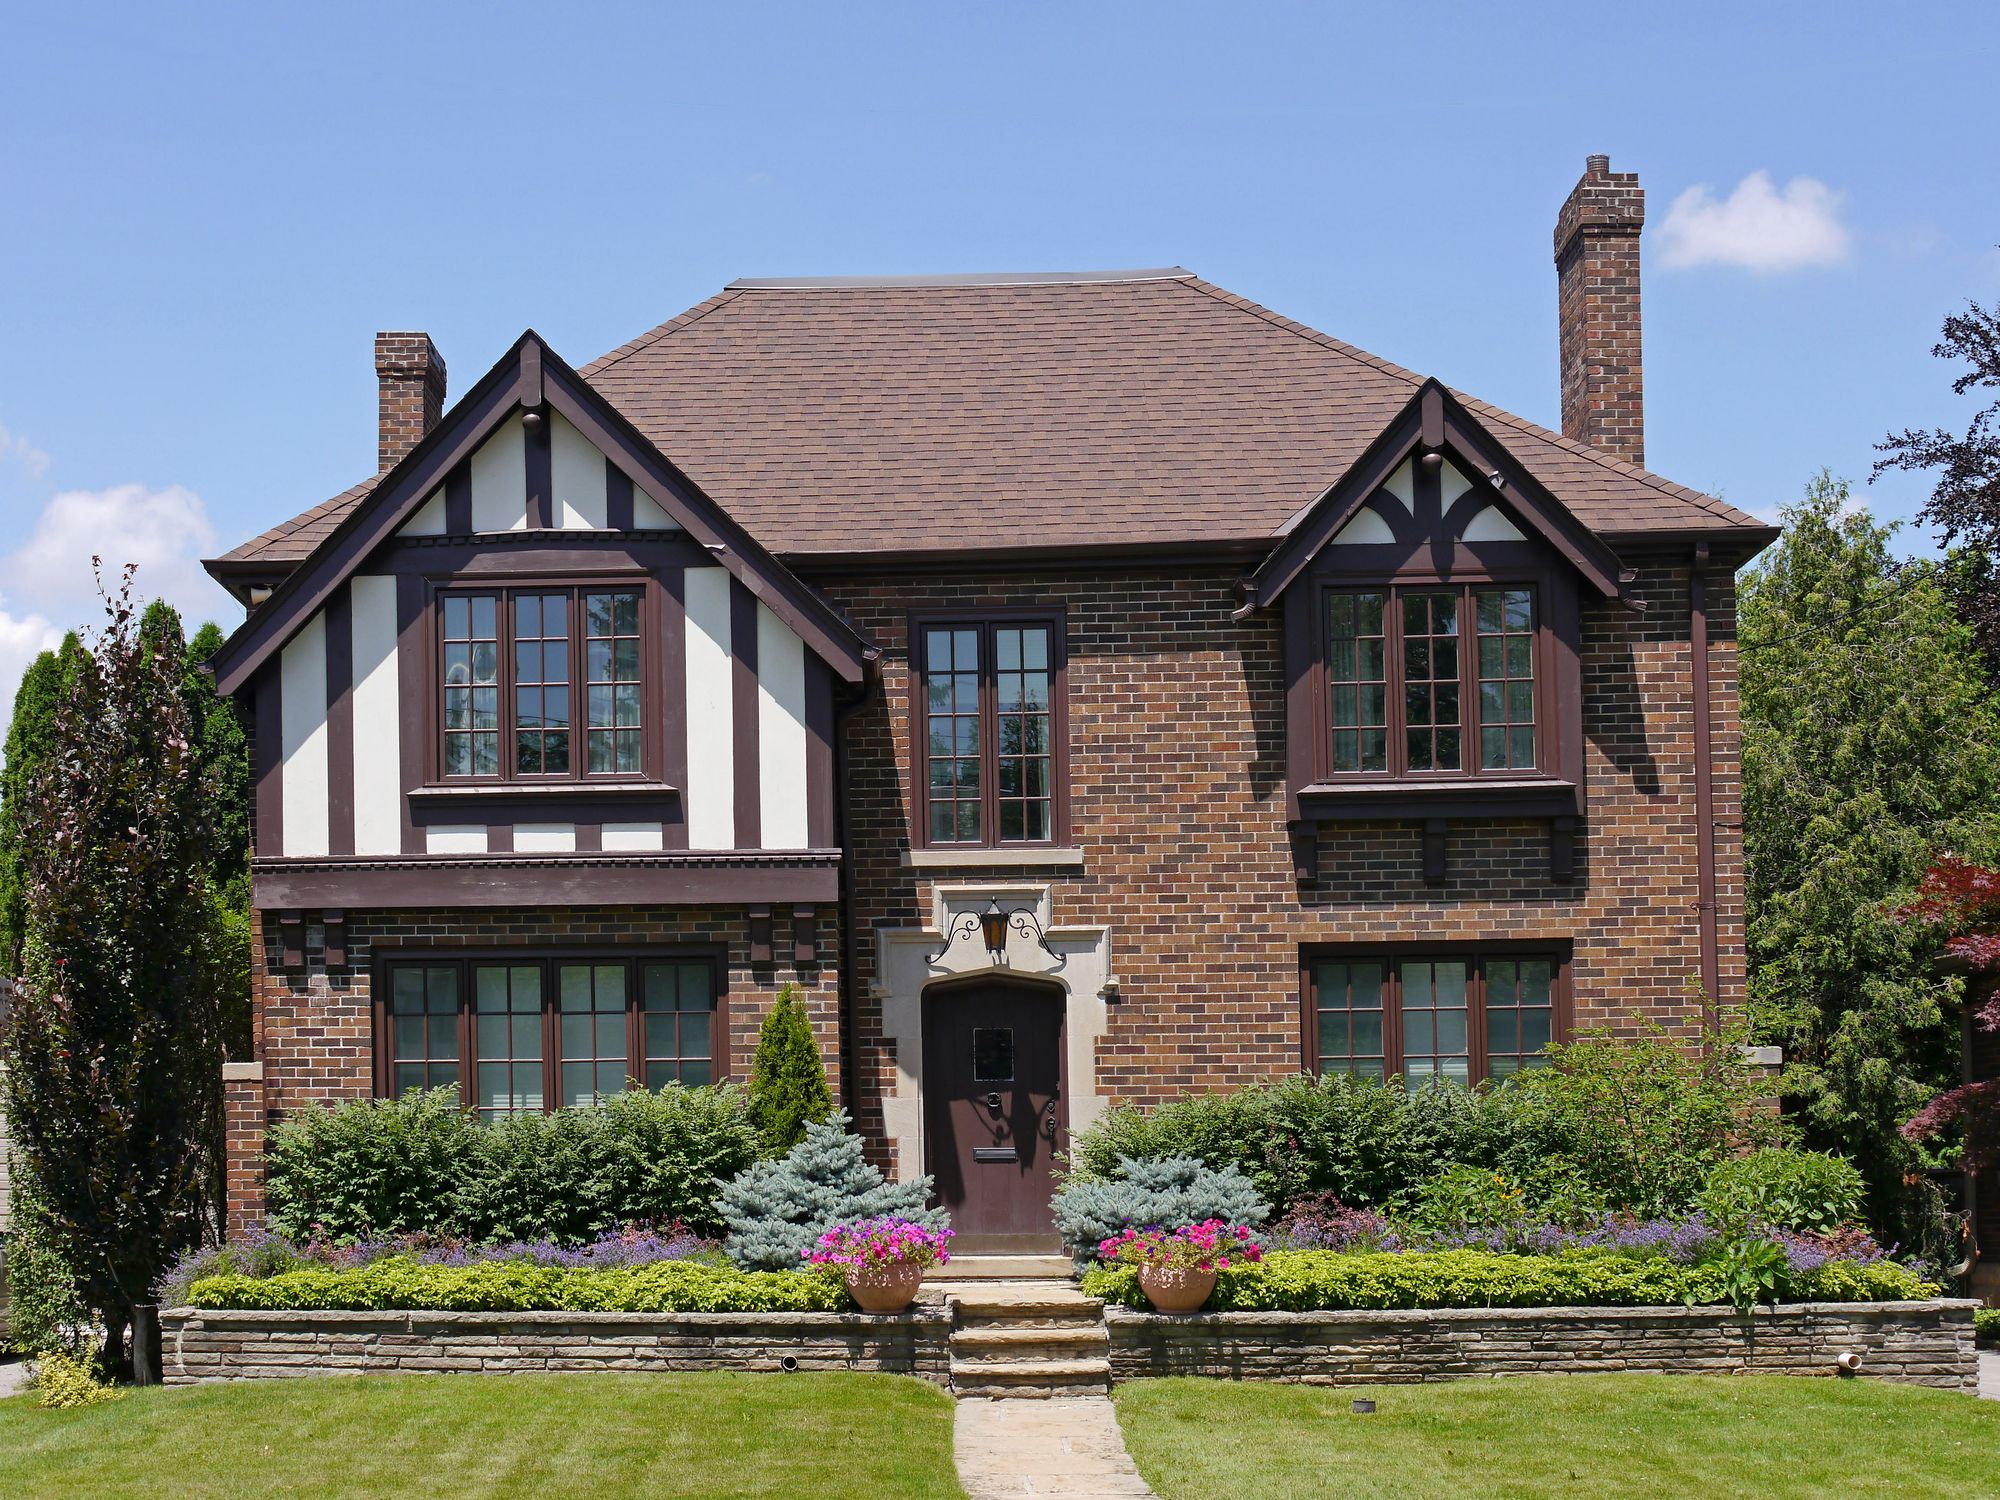 What Is A Tudor Style House